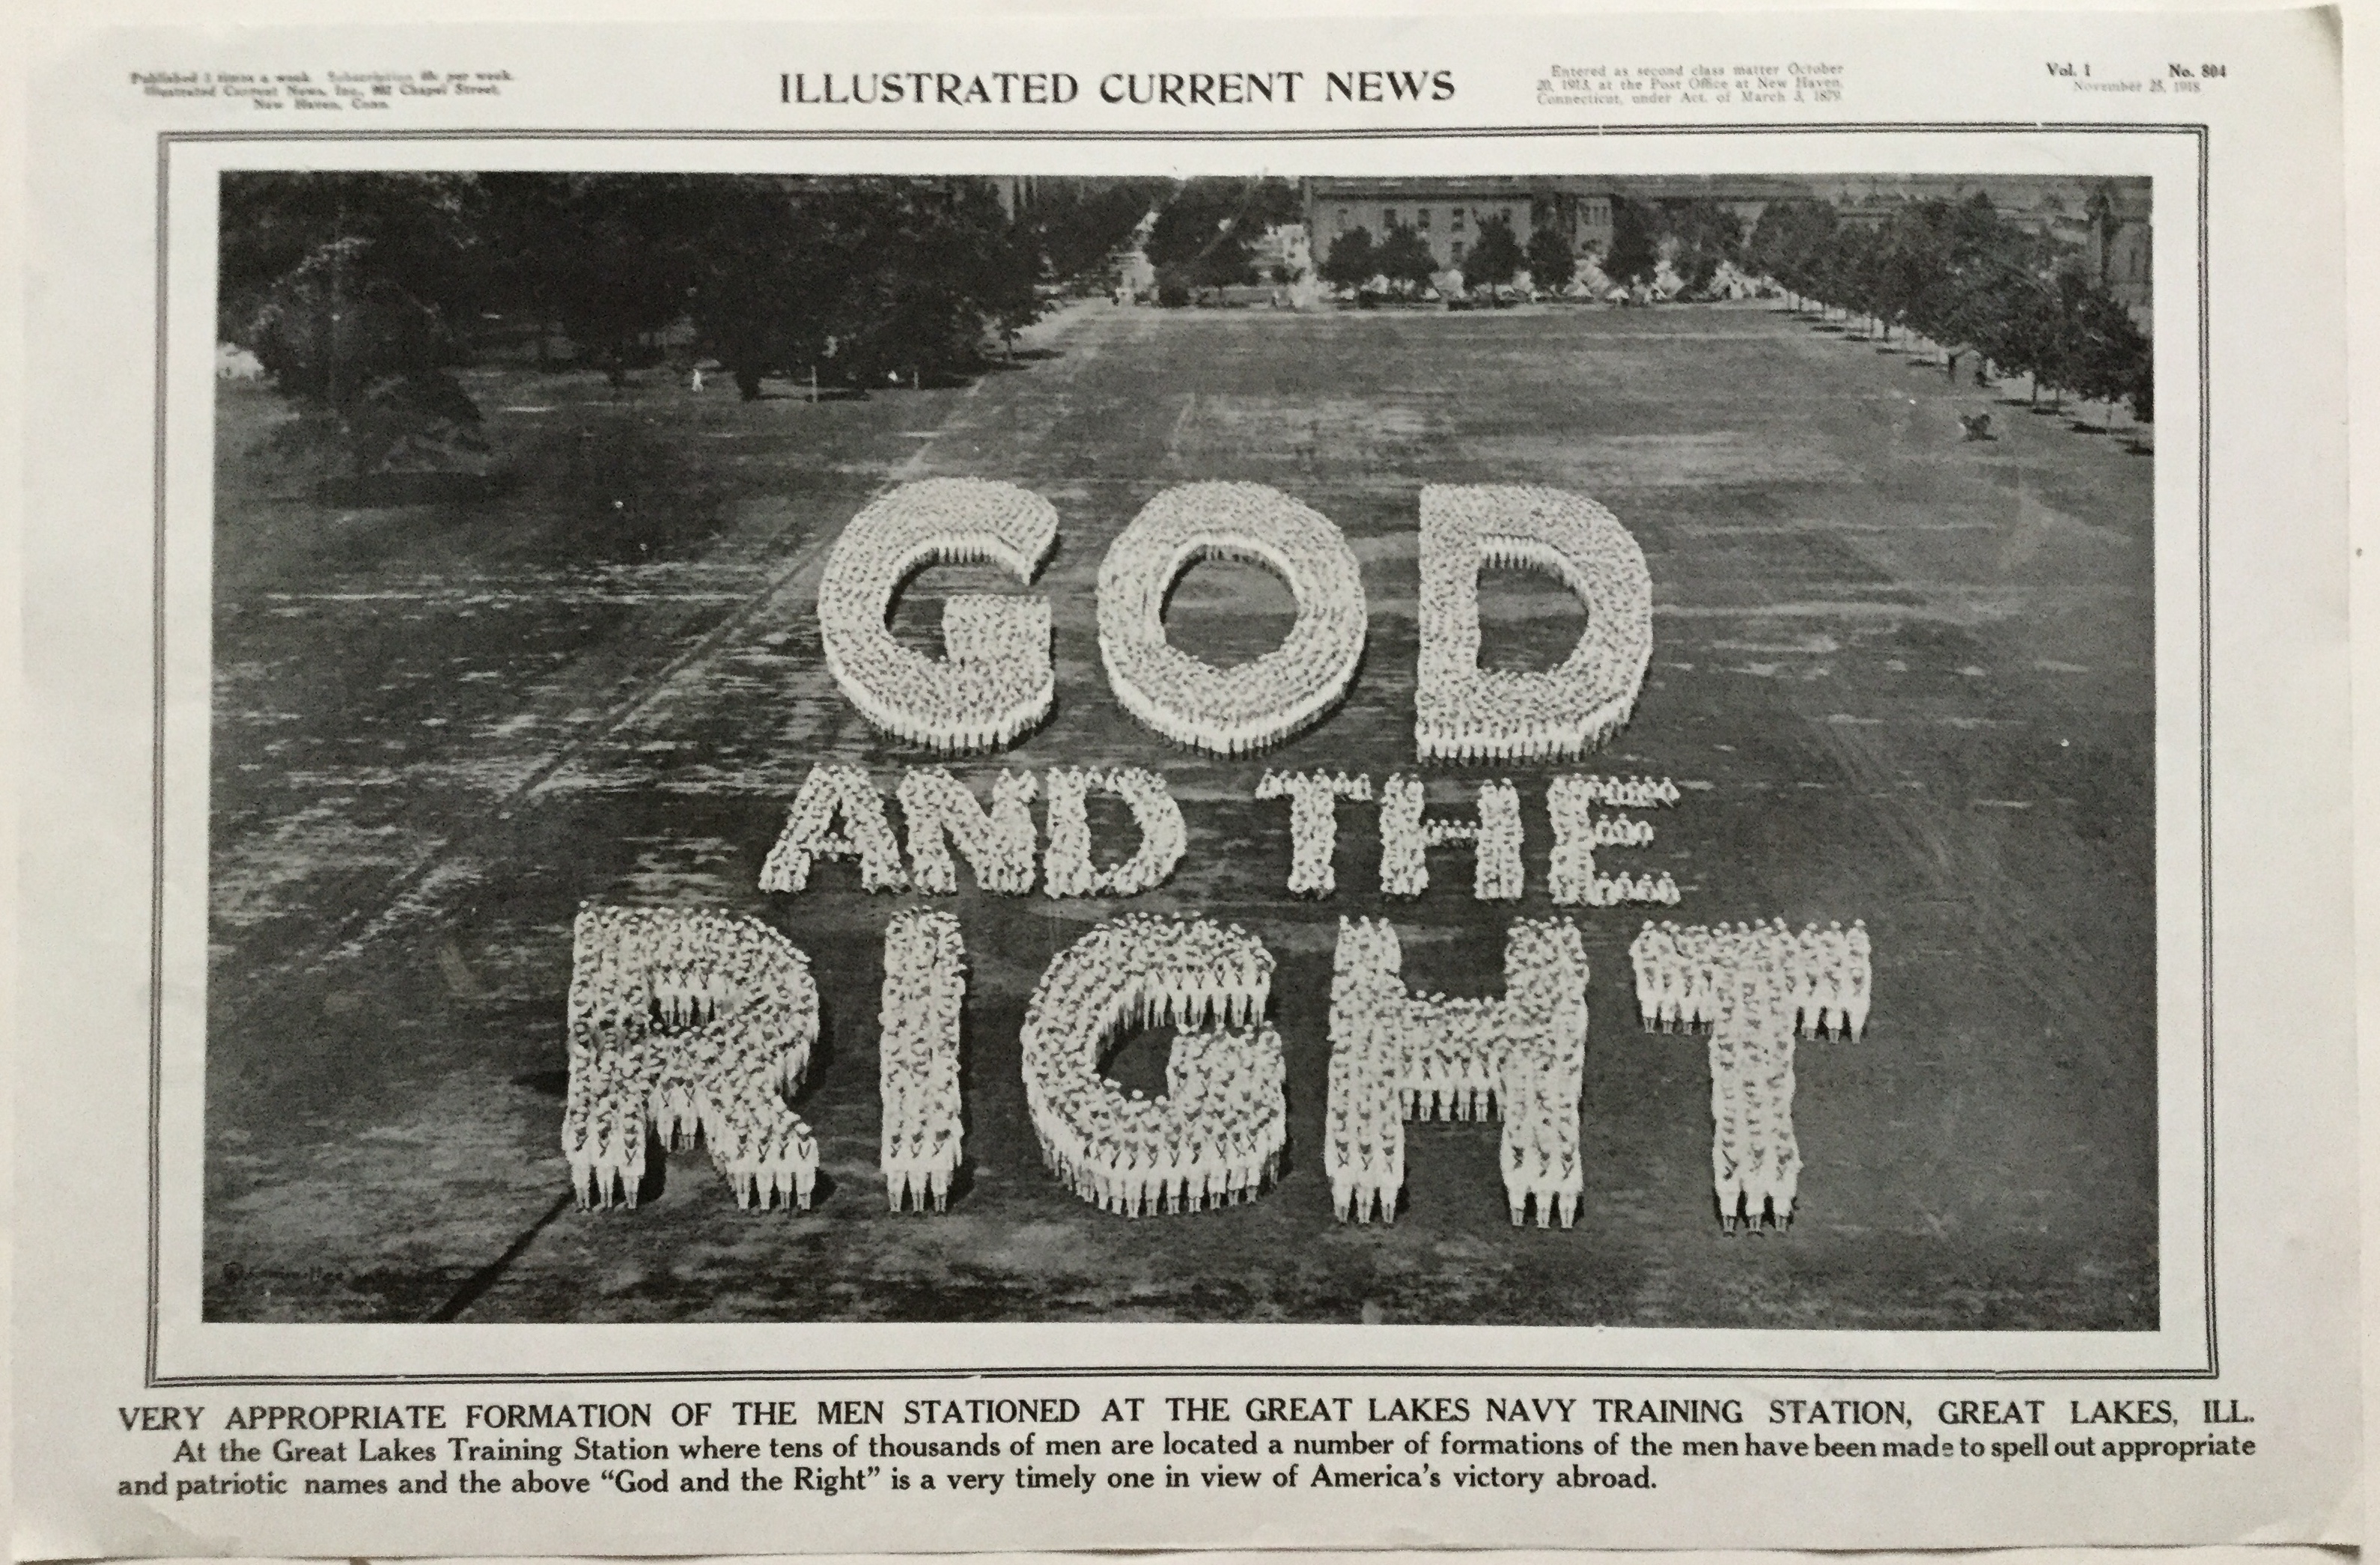 J409	GOD AND THE RIGHT - ILLUSTRATED CURRENT NEWS